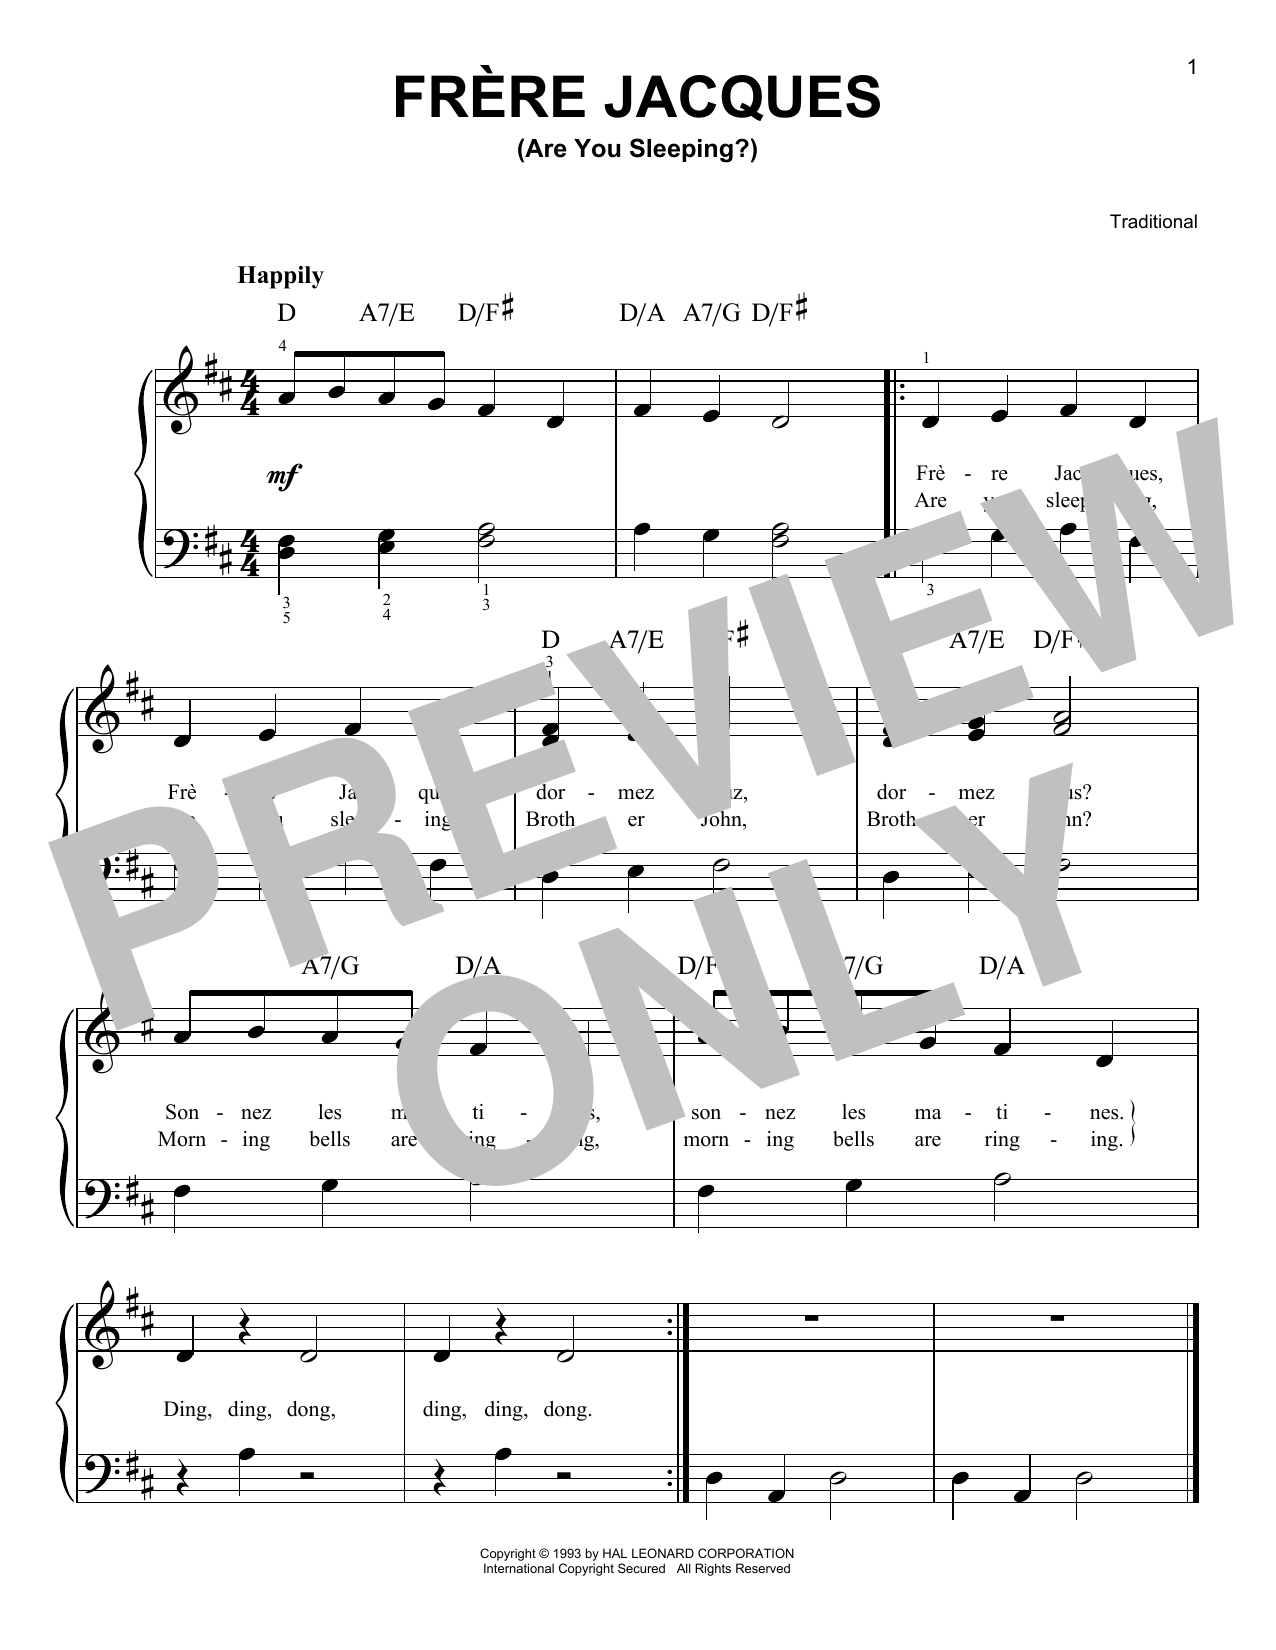 Traditional Frere Jacques (Are You Sleeping?) sheet music notes and chords. Download Printable PDF.